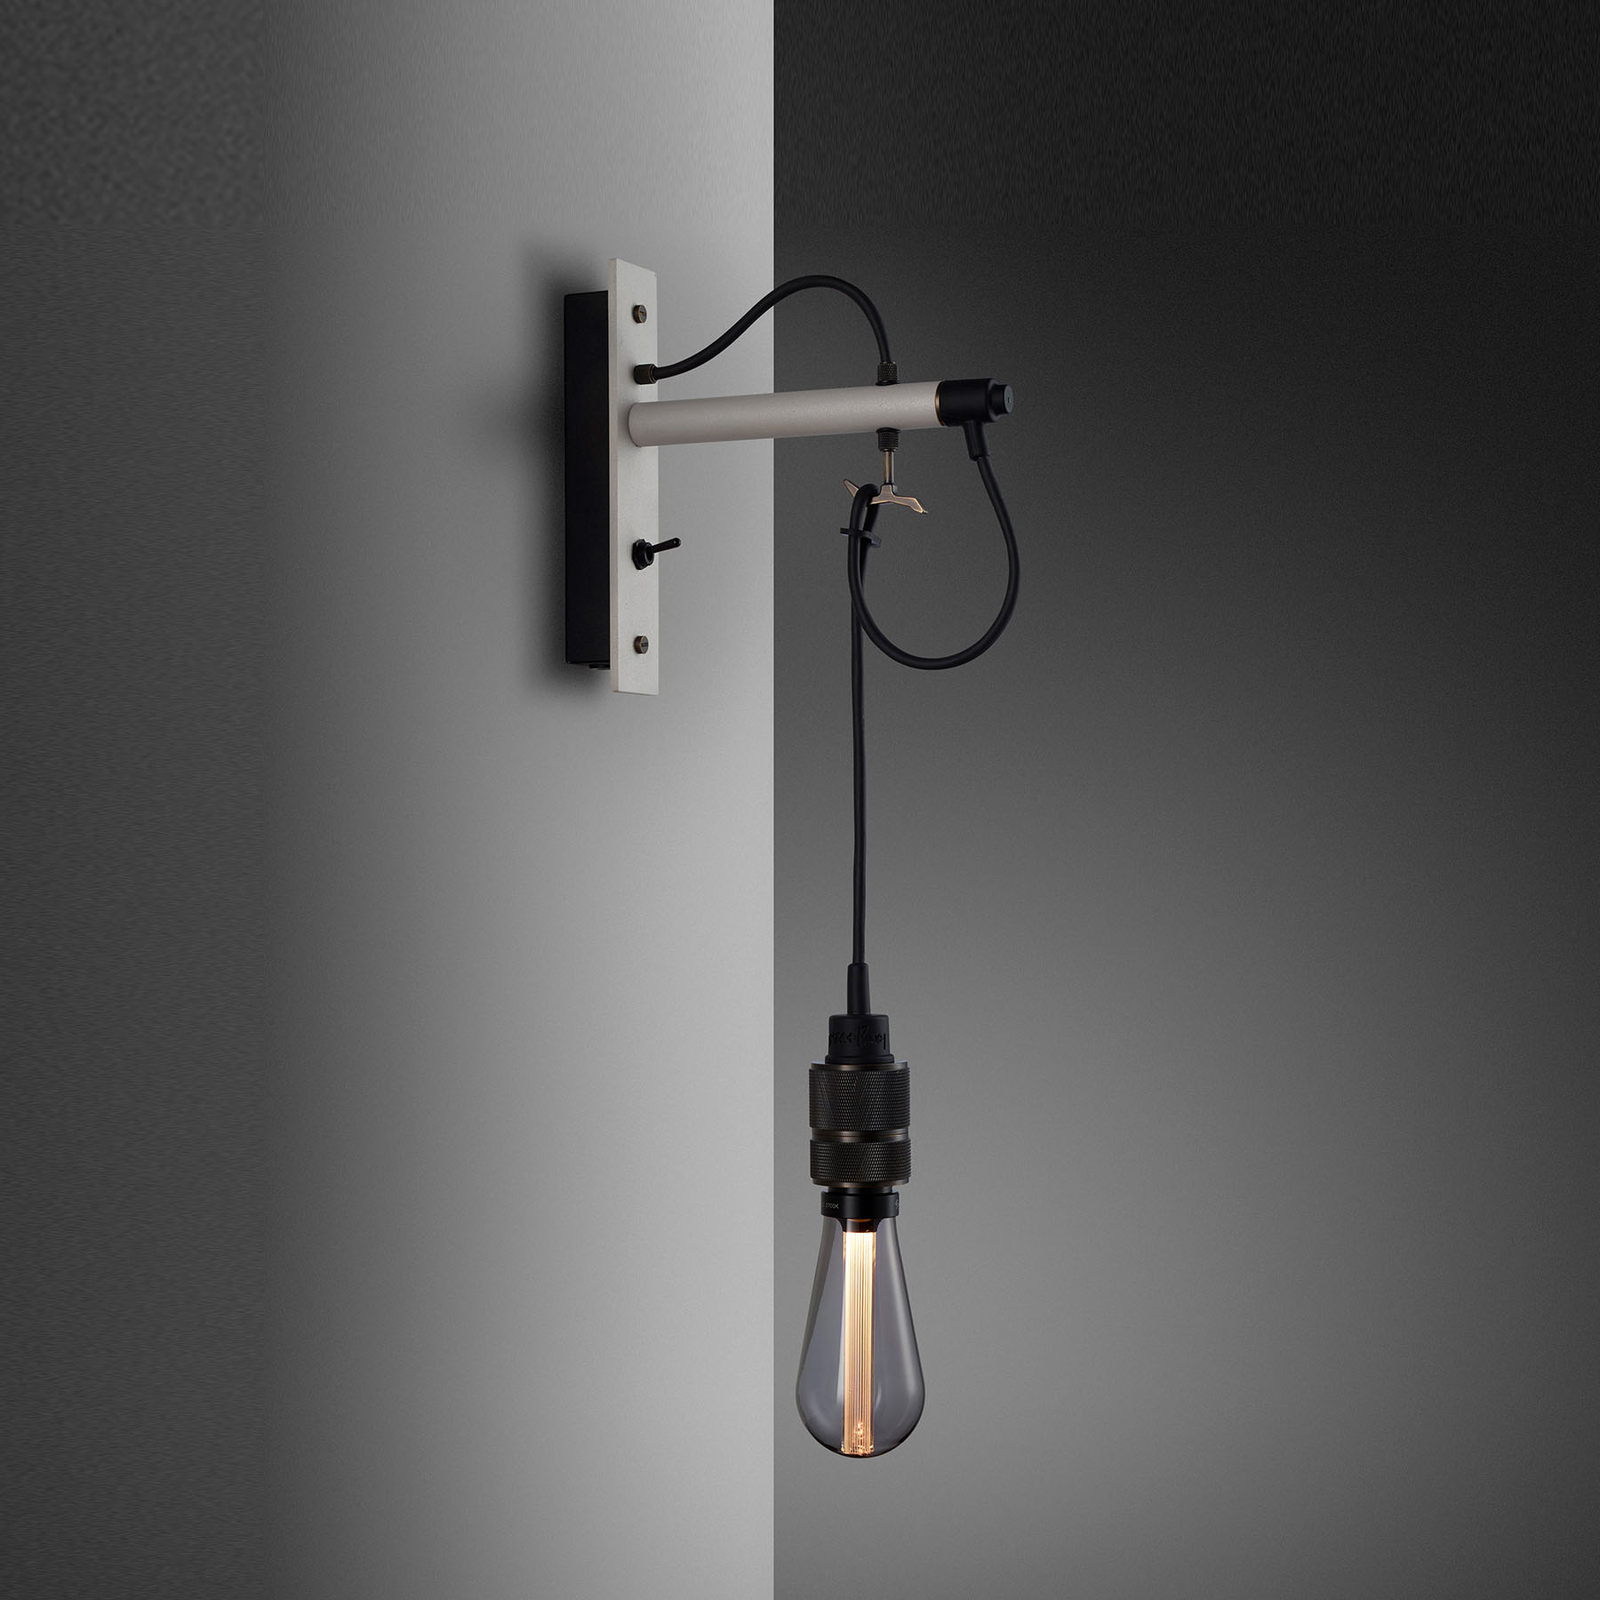 Buster + Punch Hooked Wall nude grey/bronze